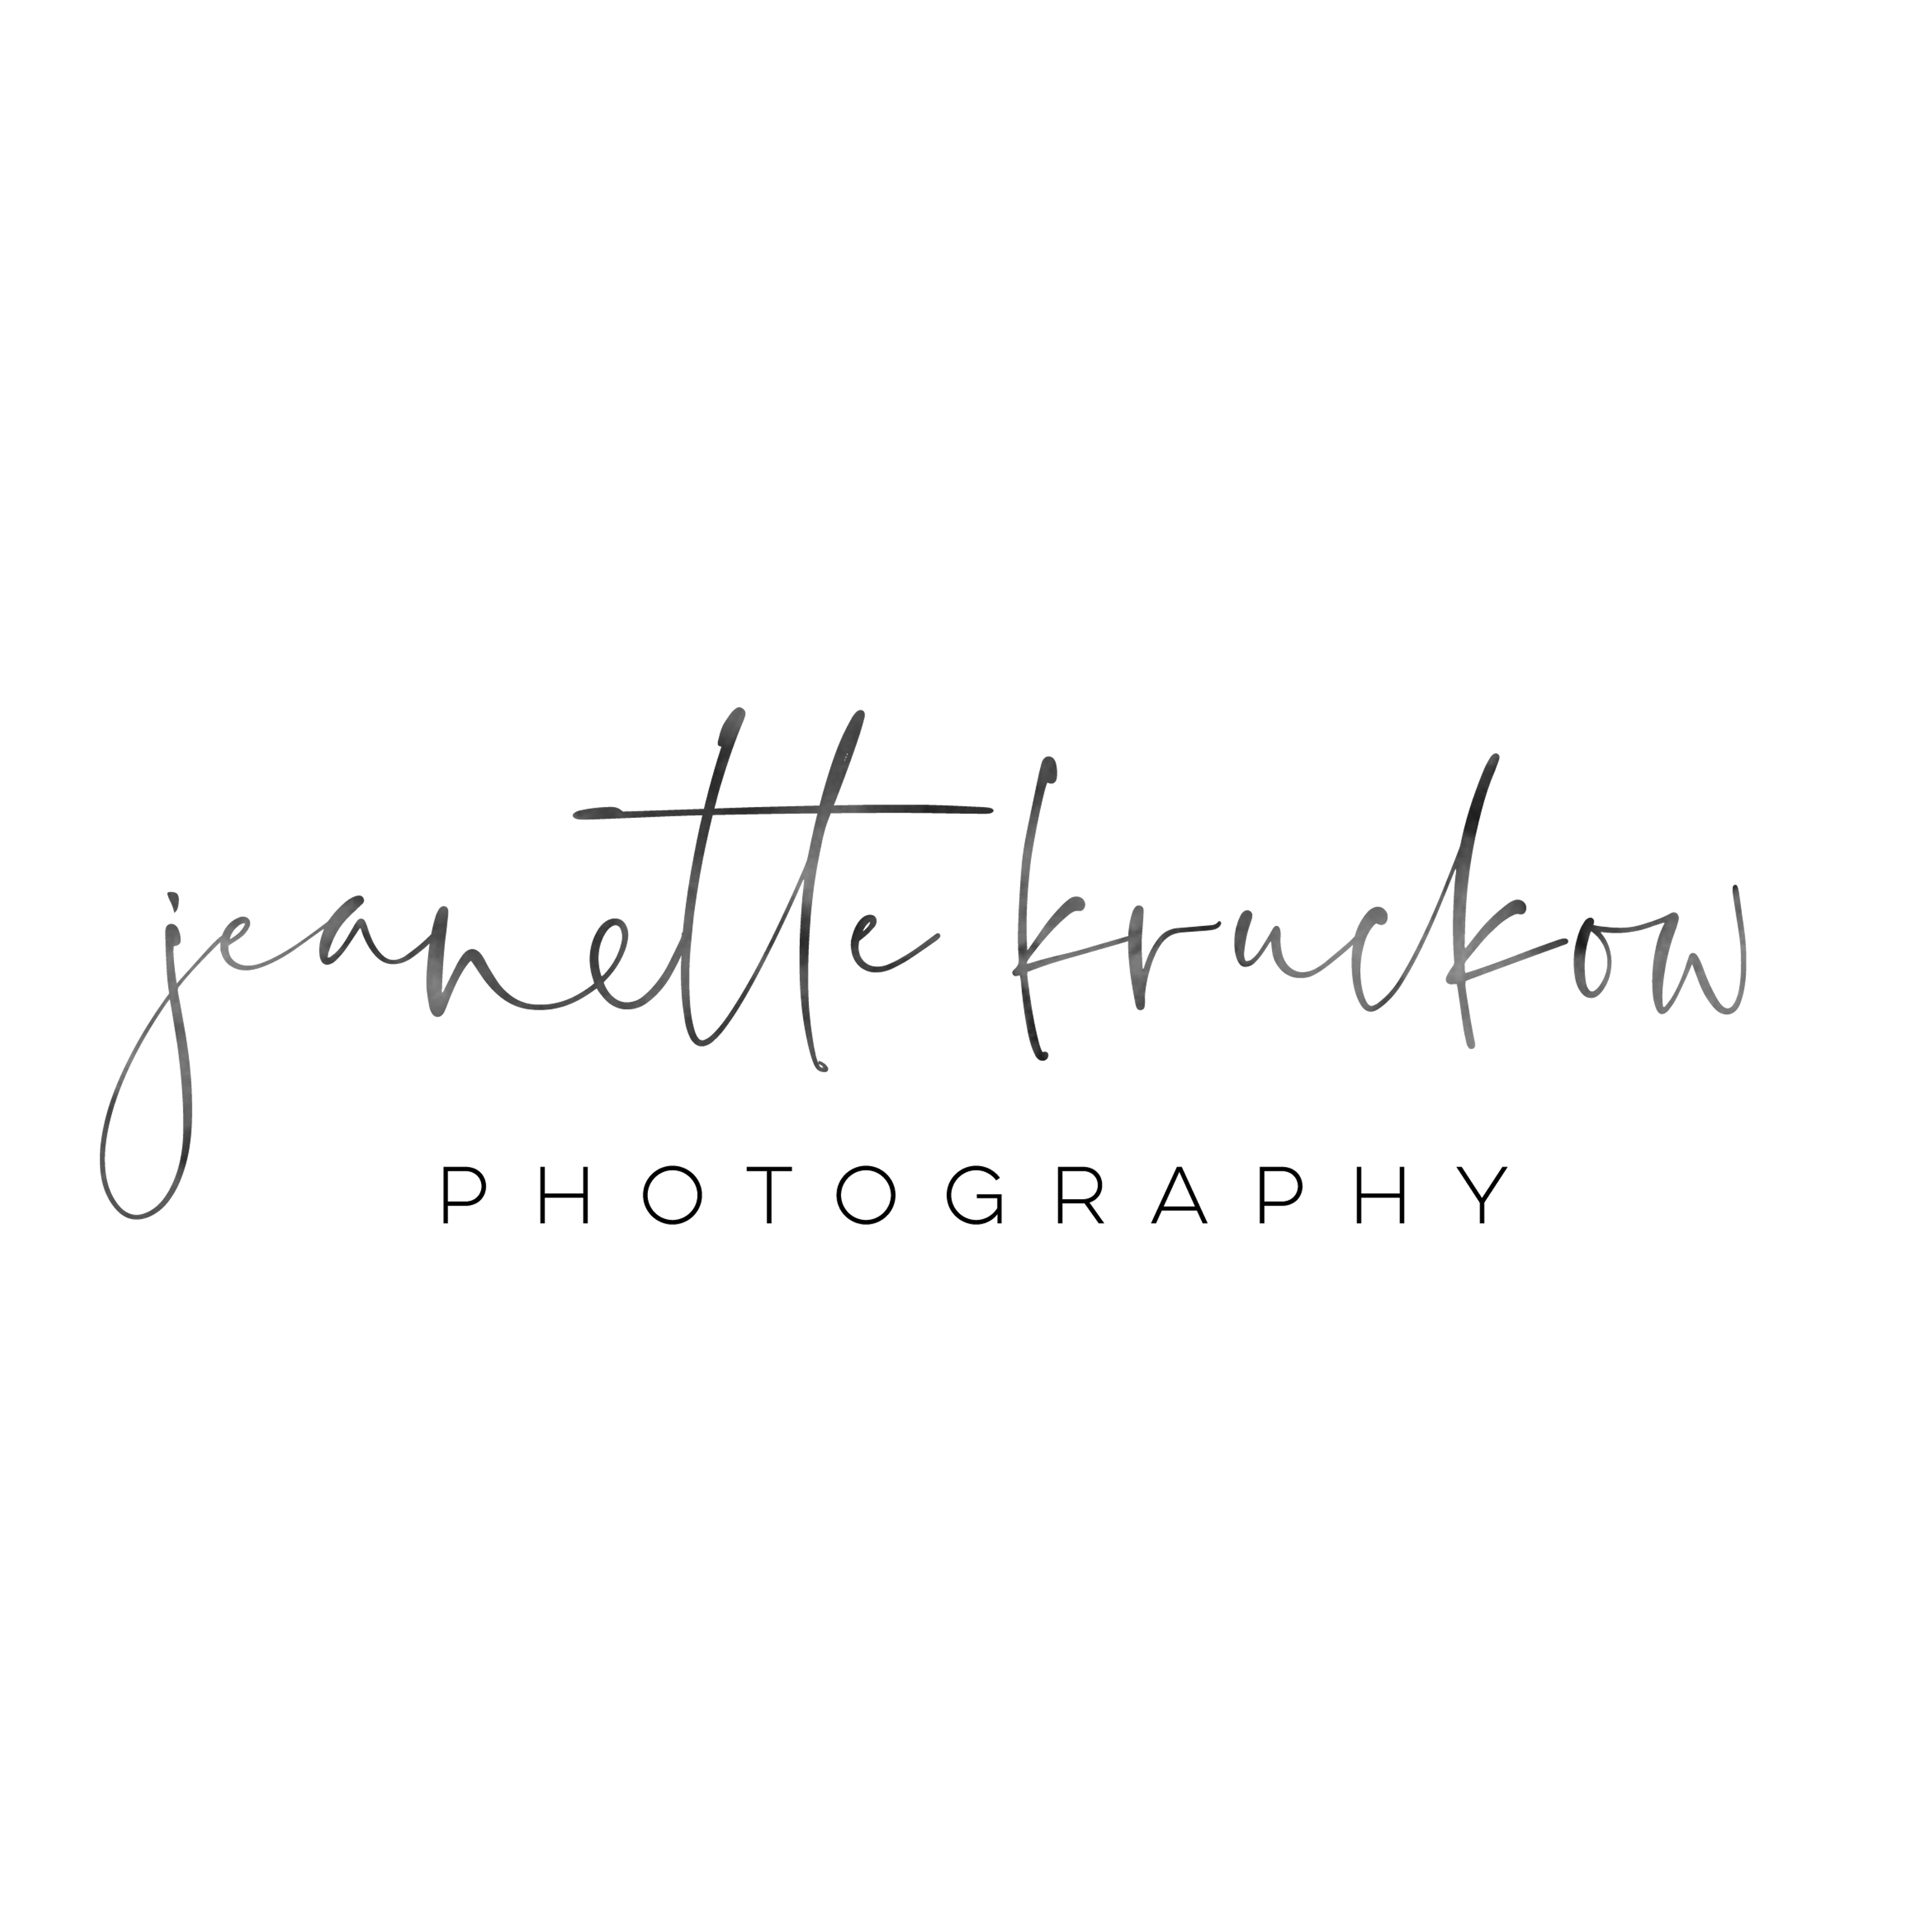 Jeanette Kruckow Photography